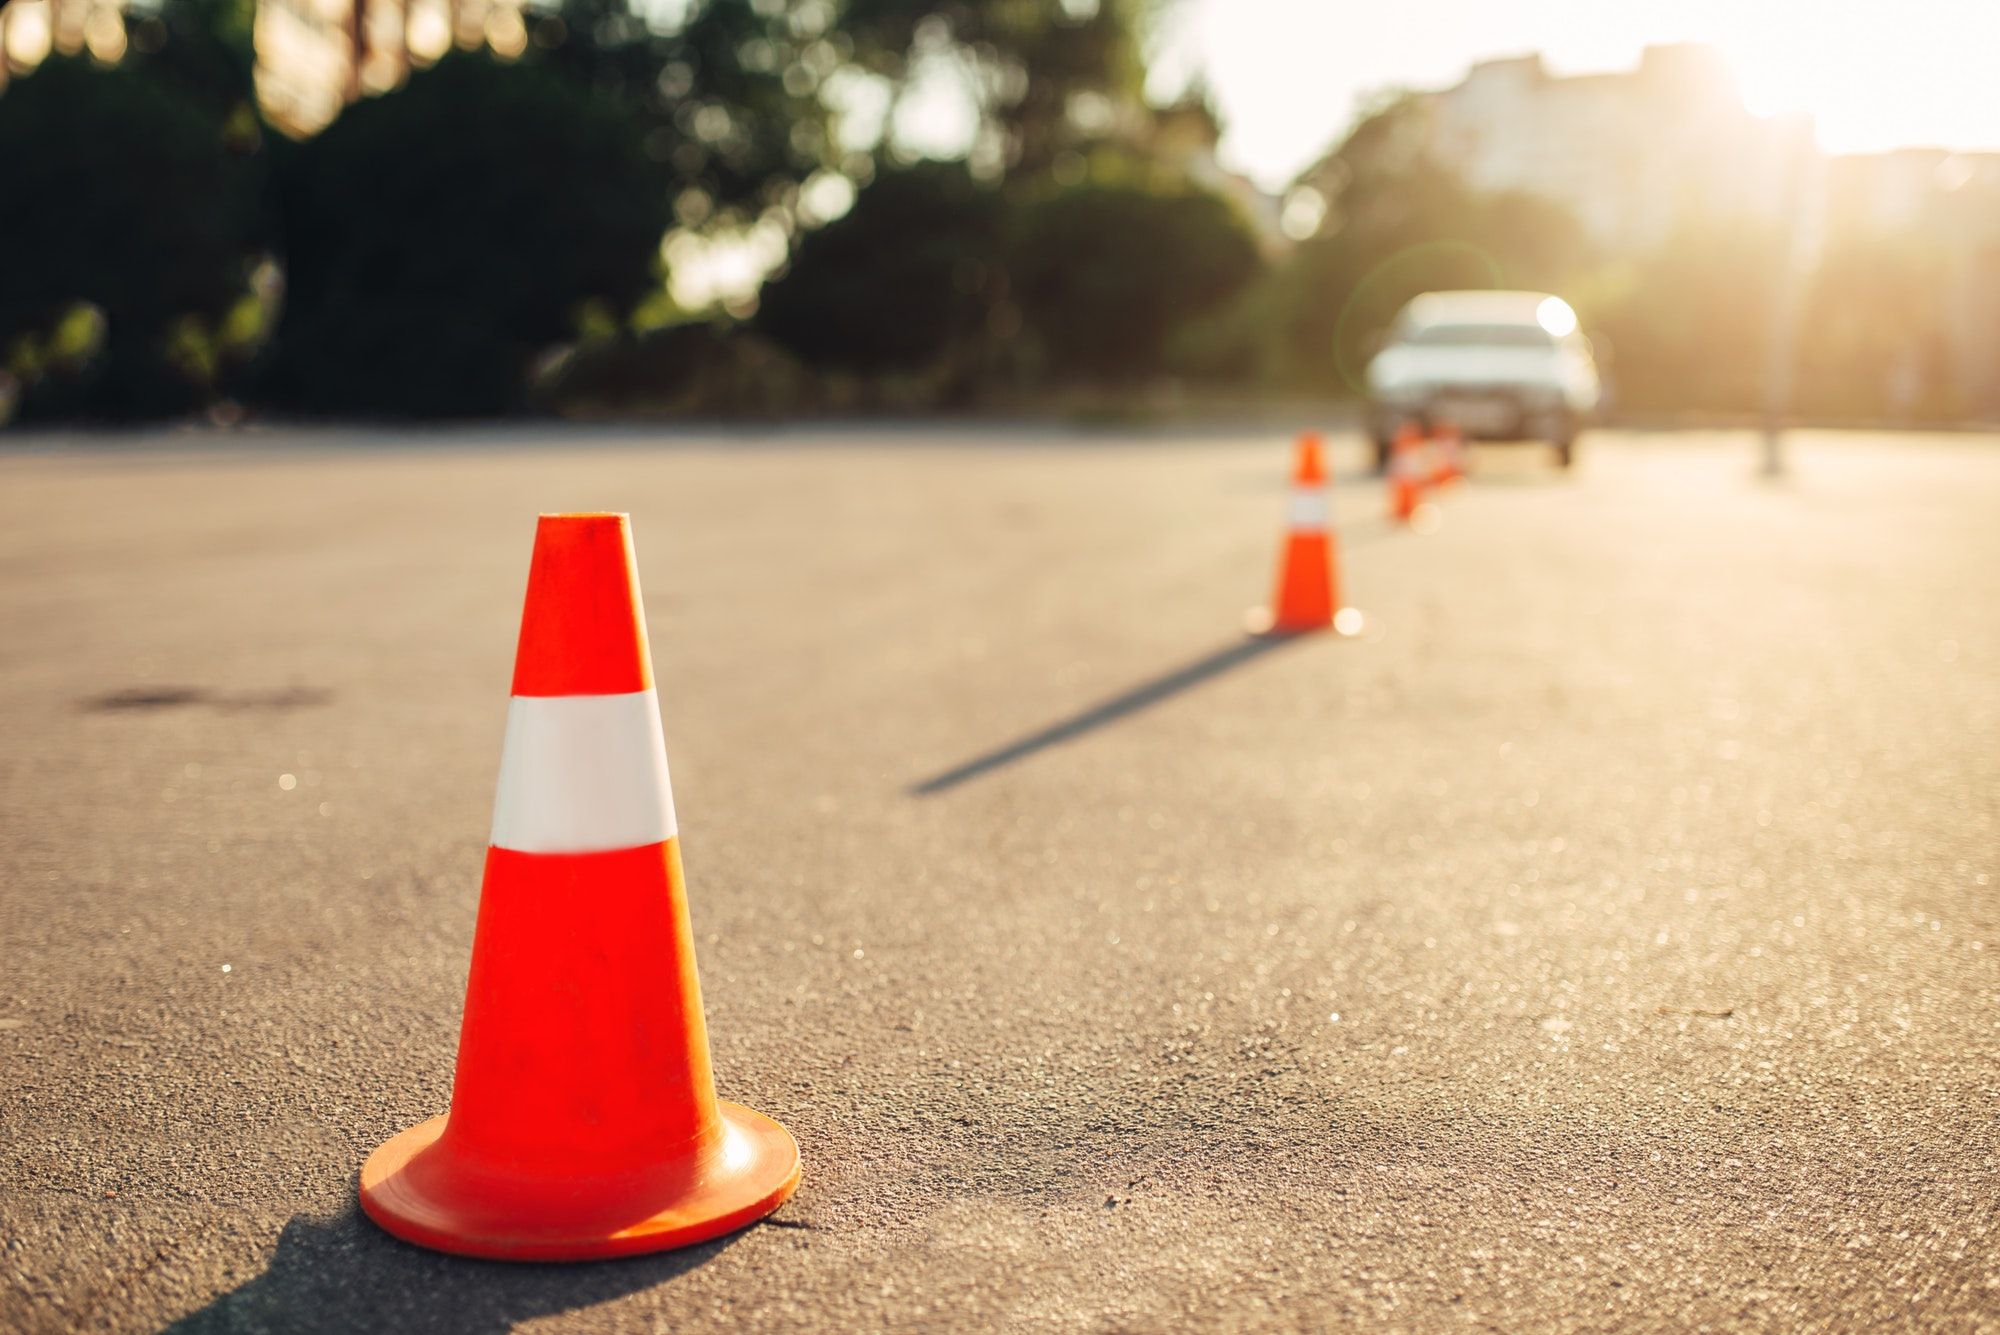 Cones for the examination, driving school concept